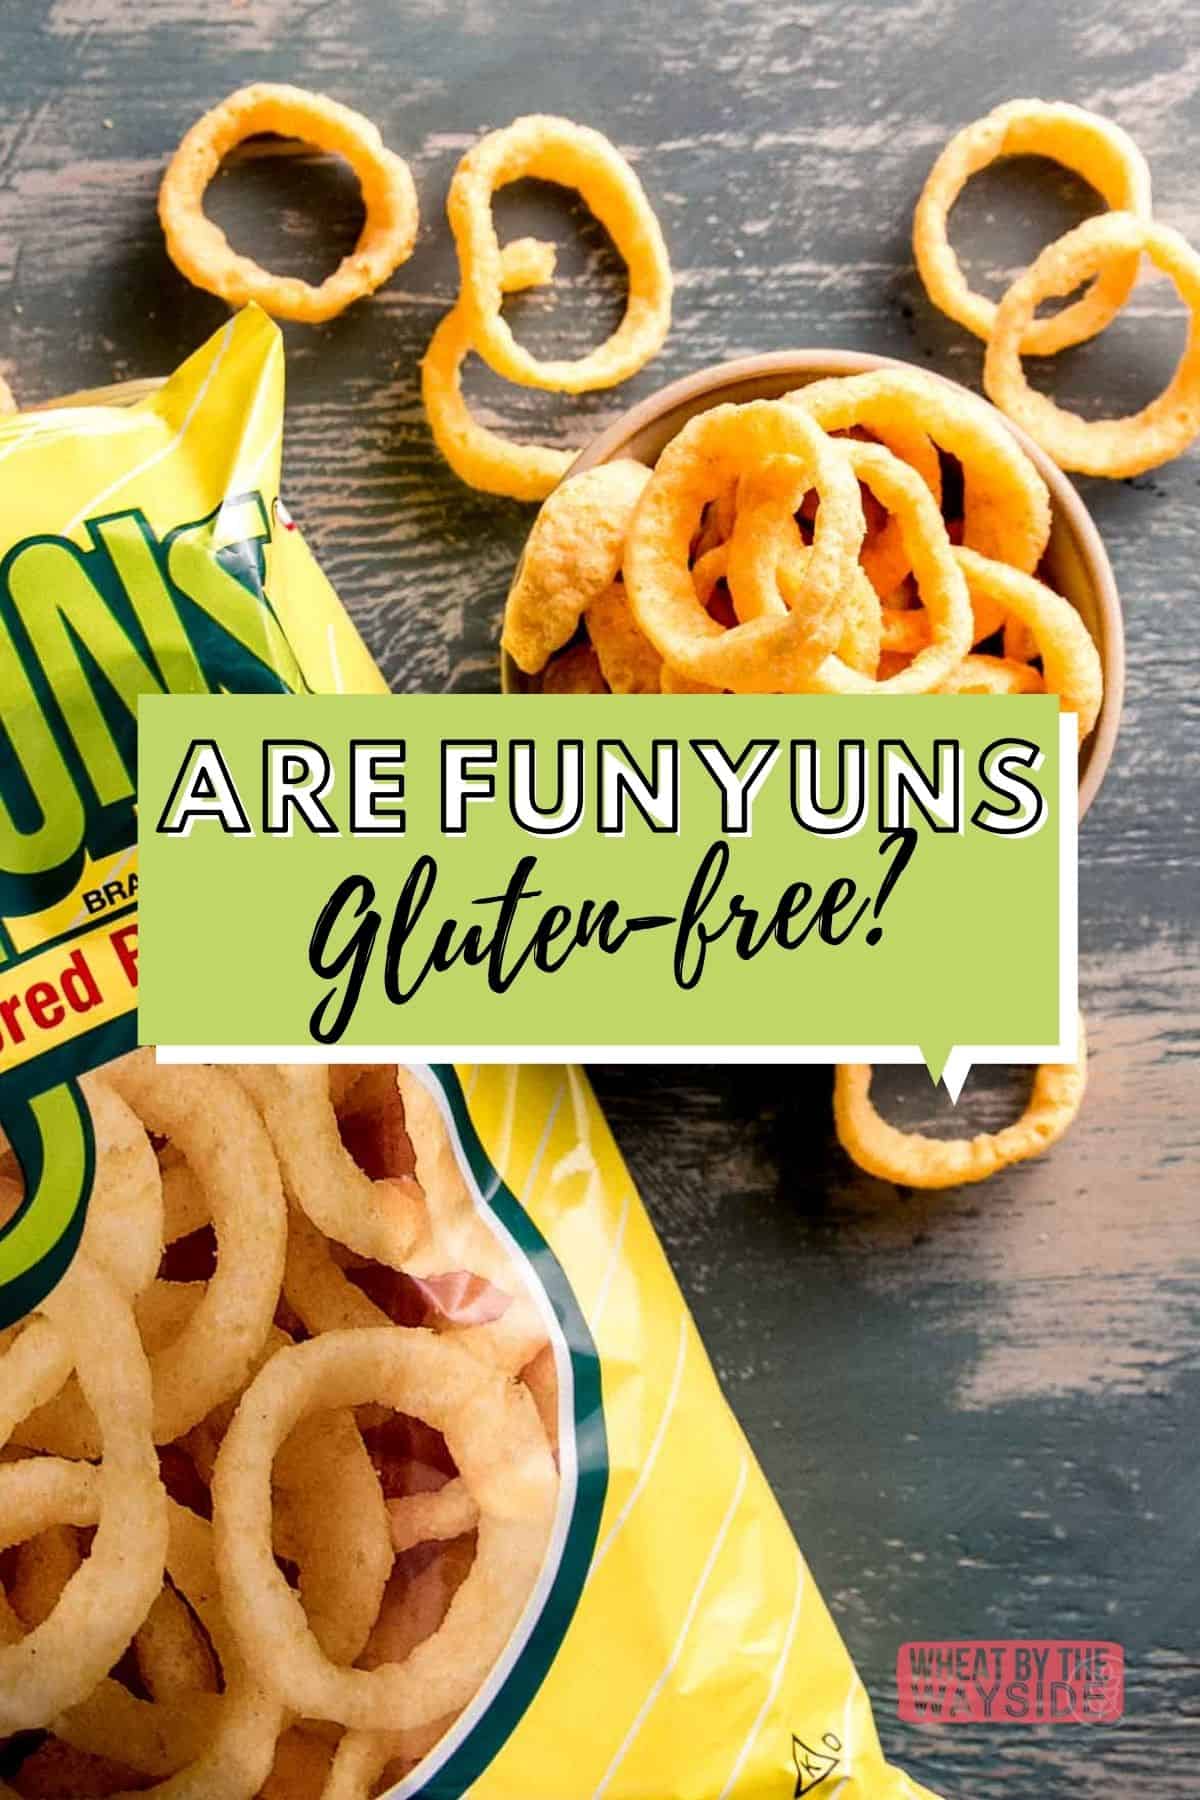 An open bag of Funyuns with some spilling out onto a teal wooden surface. Some Funyuns in a bowl next to the bag.